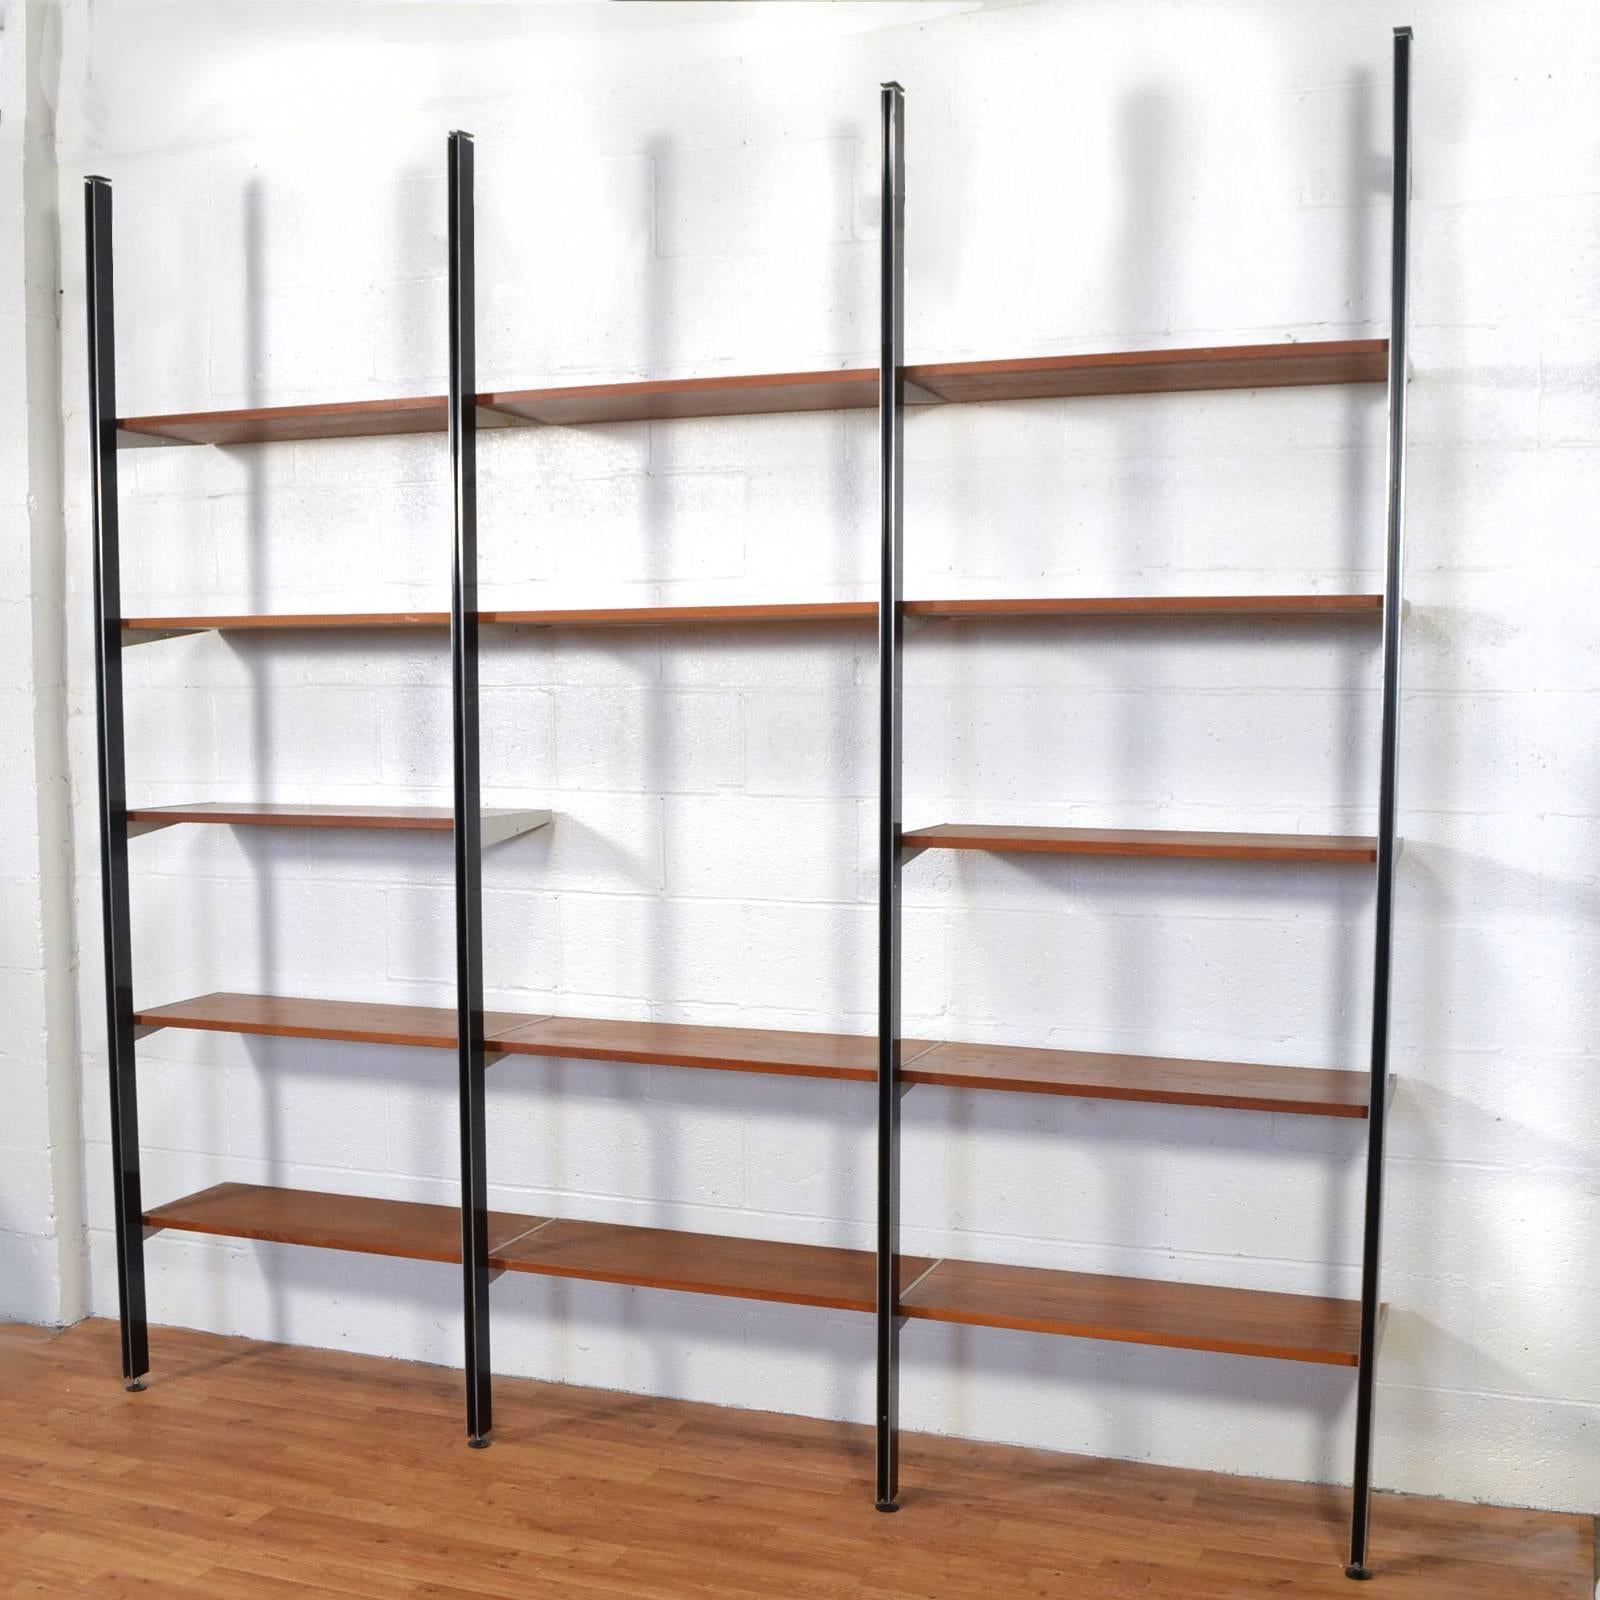 This CSS shelving unt is an excellent example. The beautiful minimalist design is comprised of four tension-mounted uprights and fourteen teak shelves. Perfect for books, media, or accessories,  the shelves can be arranged and adjusted to best suit